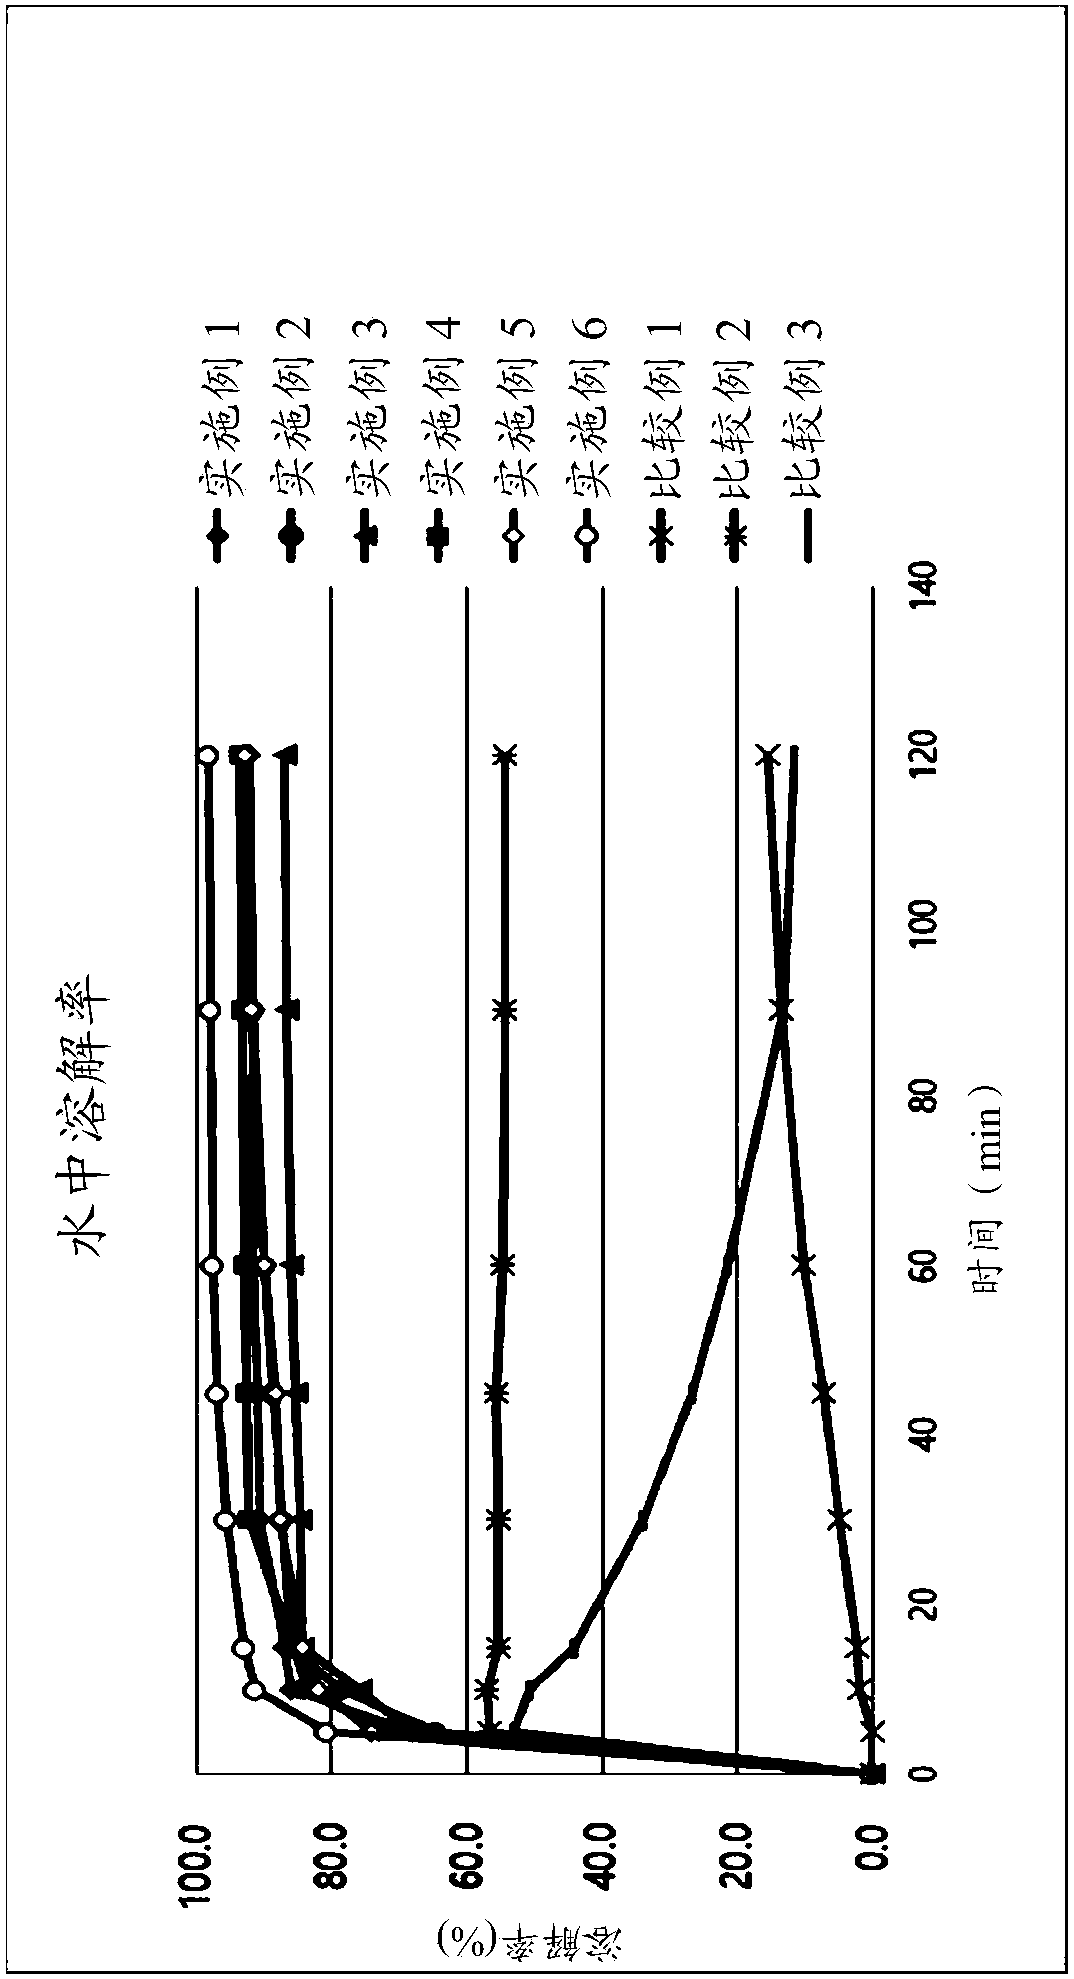 Pharmaceutical composition comprising nebivolol with improved dissolution rate